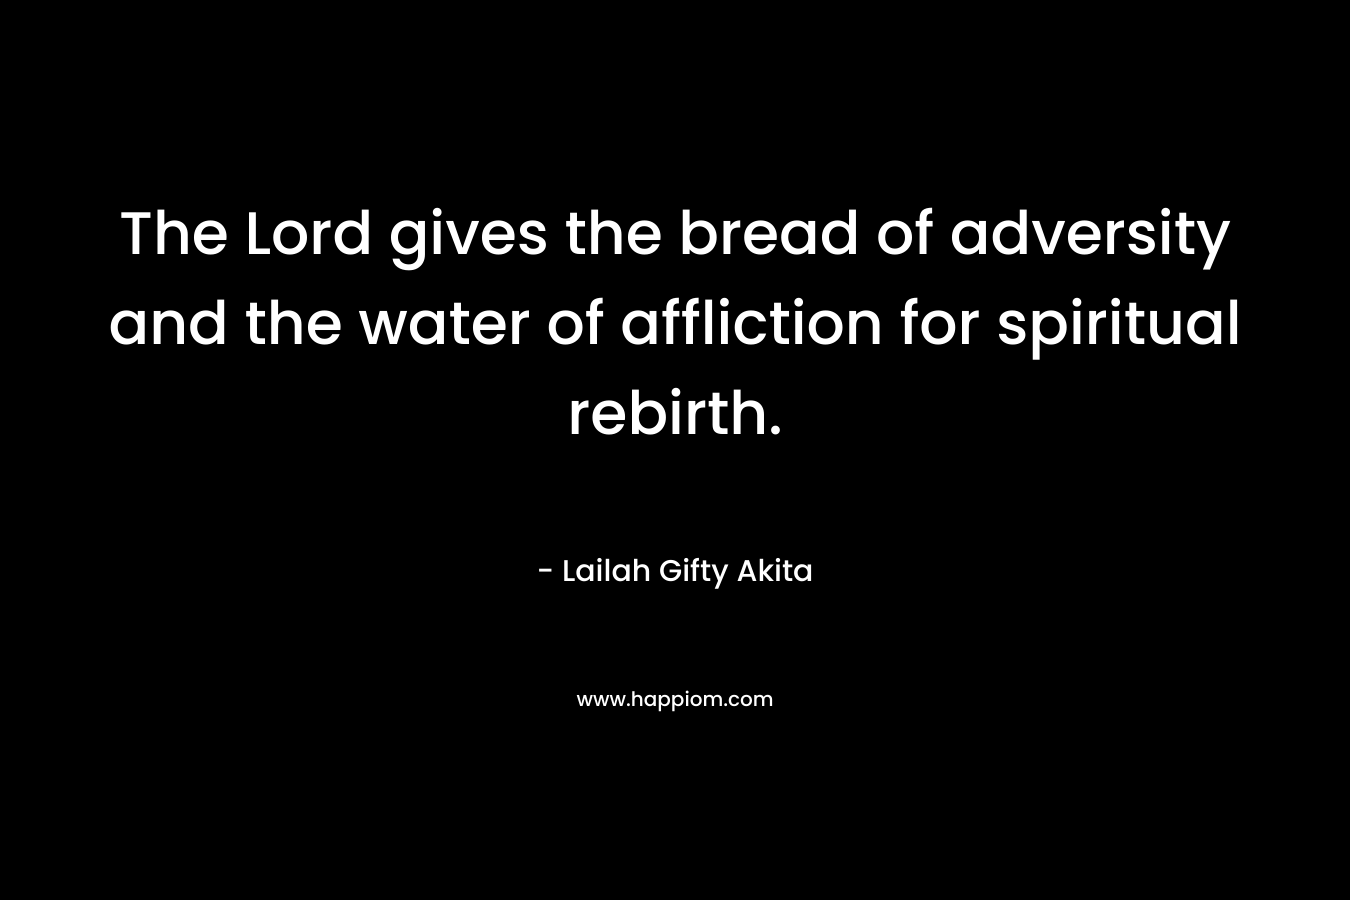 The Lord gives the bread of adversity and the water of affliction for spiritual rebirth.